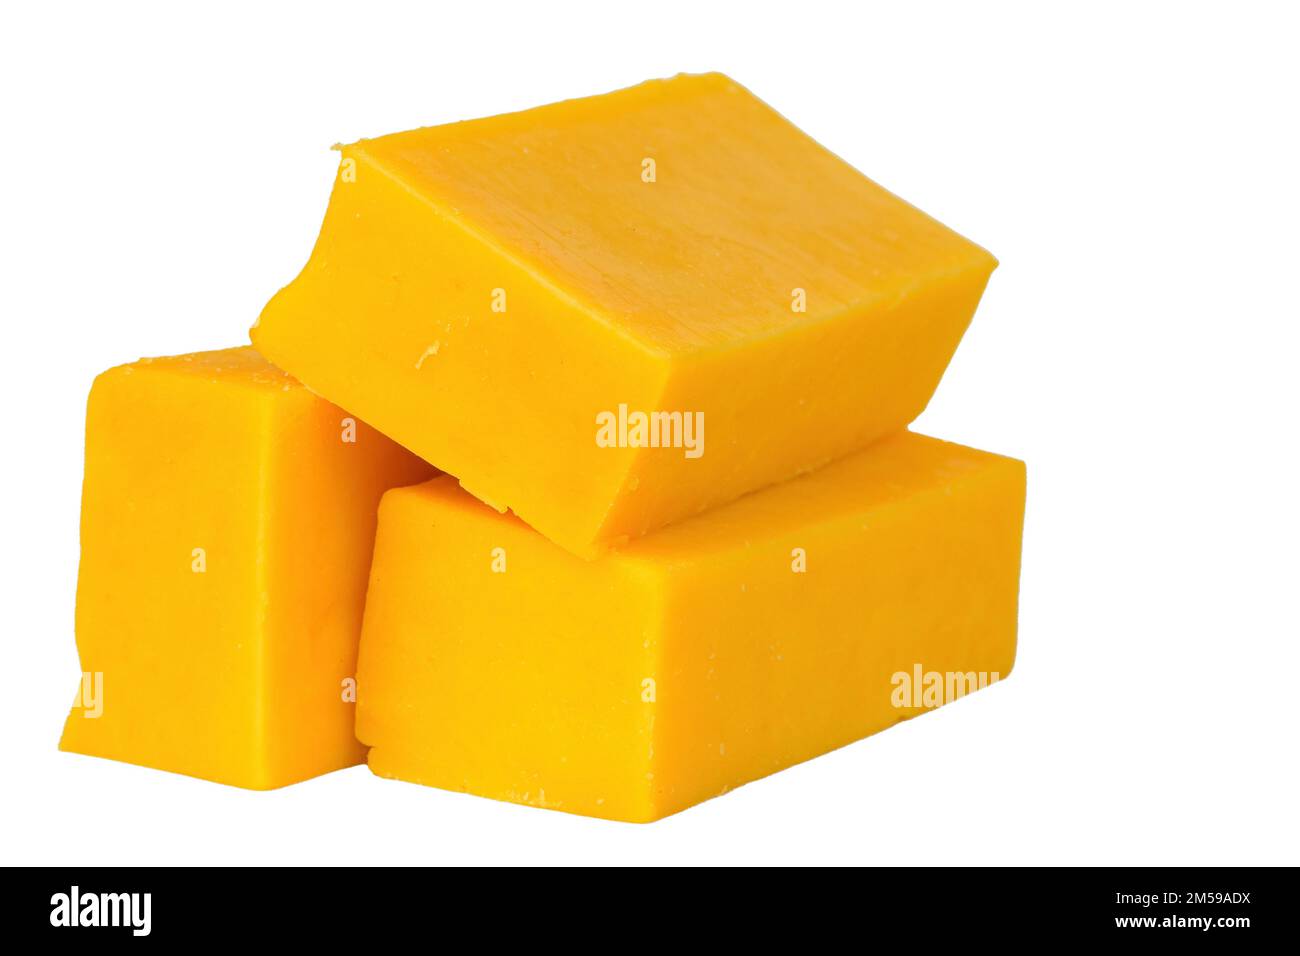 Cheddar cheese Stock Photo